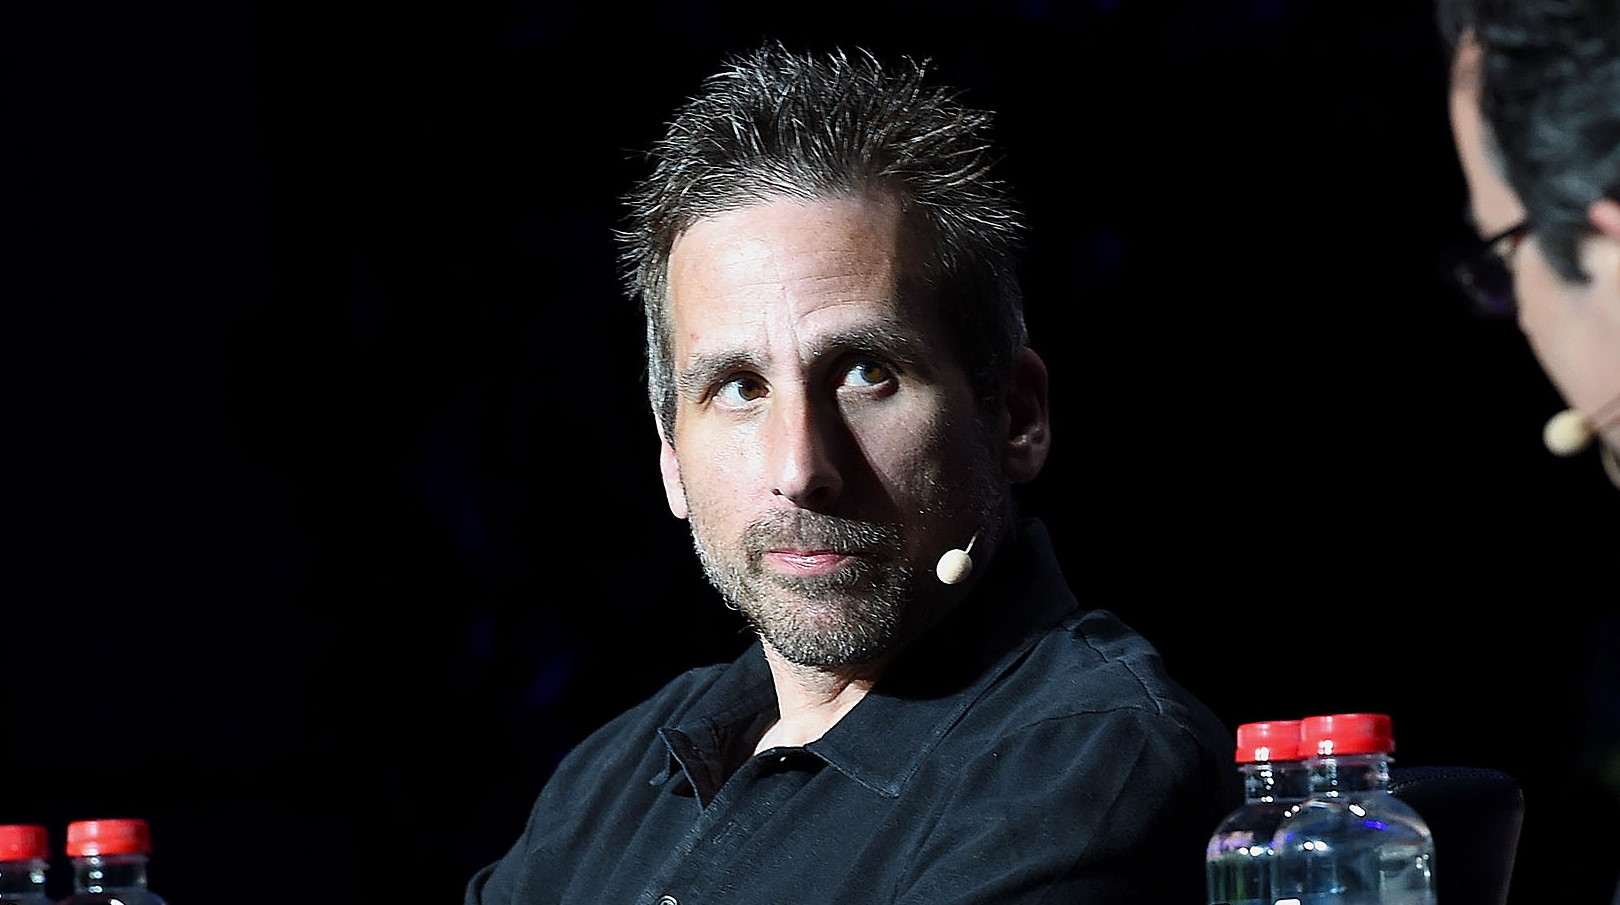  Ken Levine's new game may still be years away 